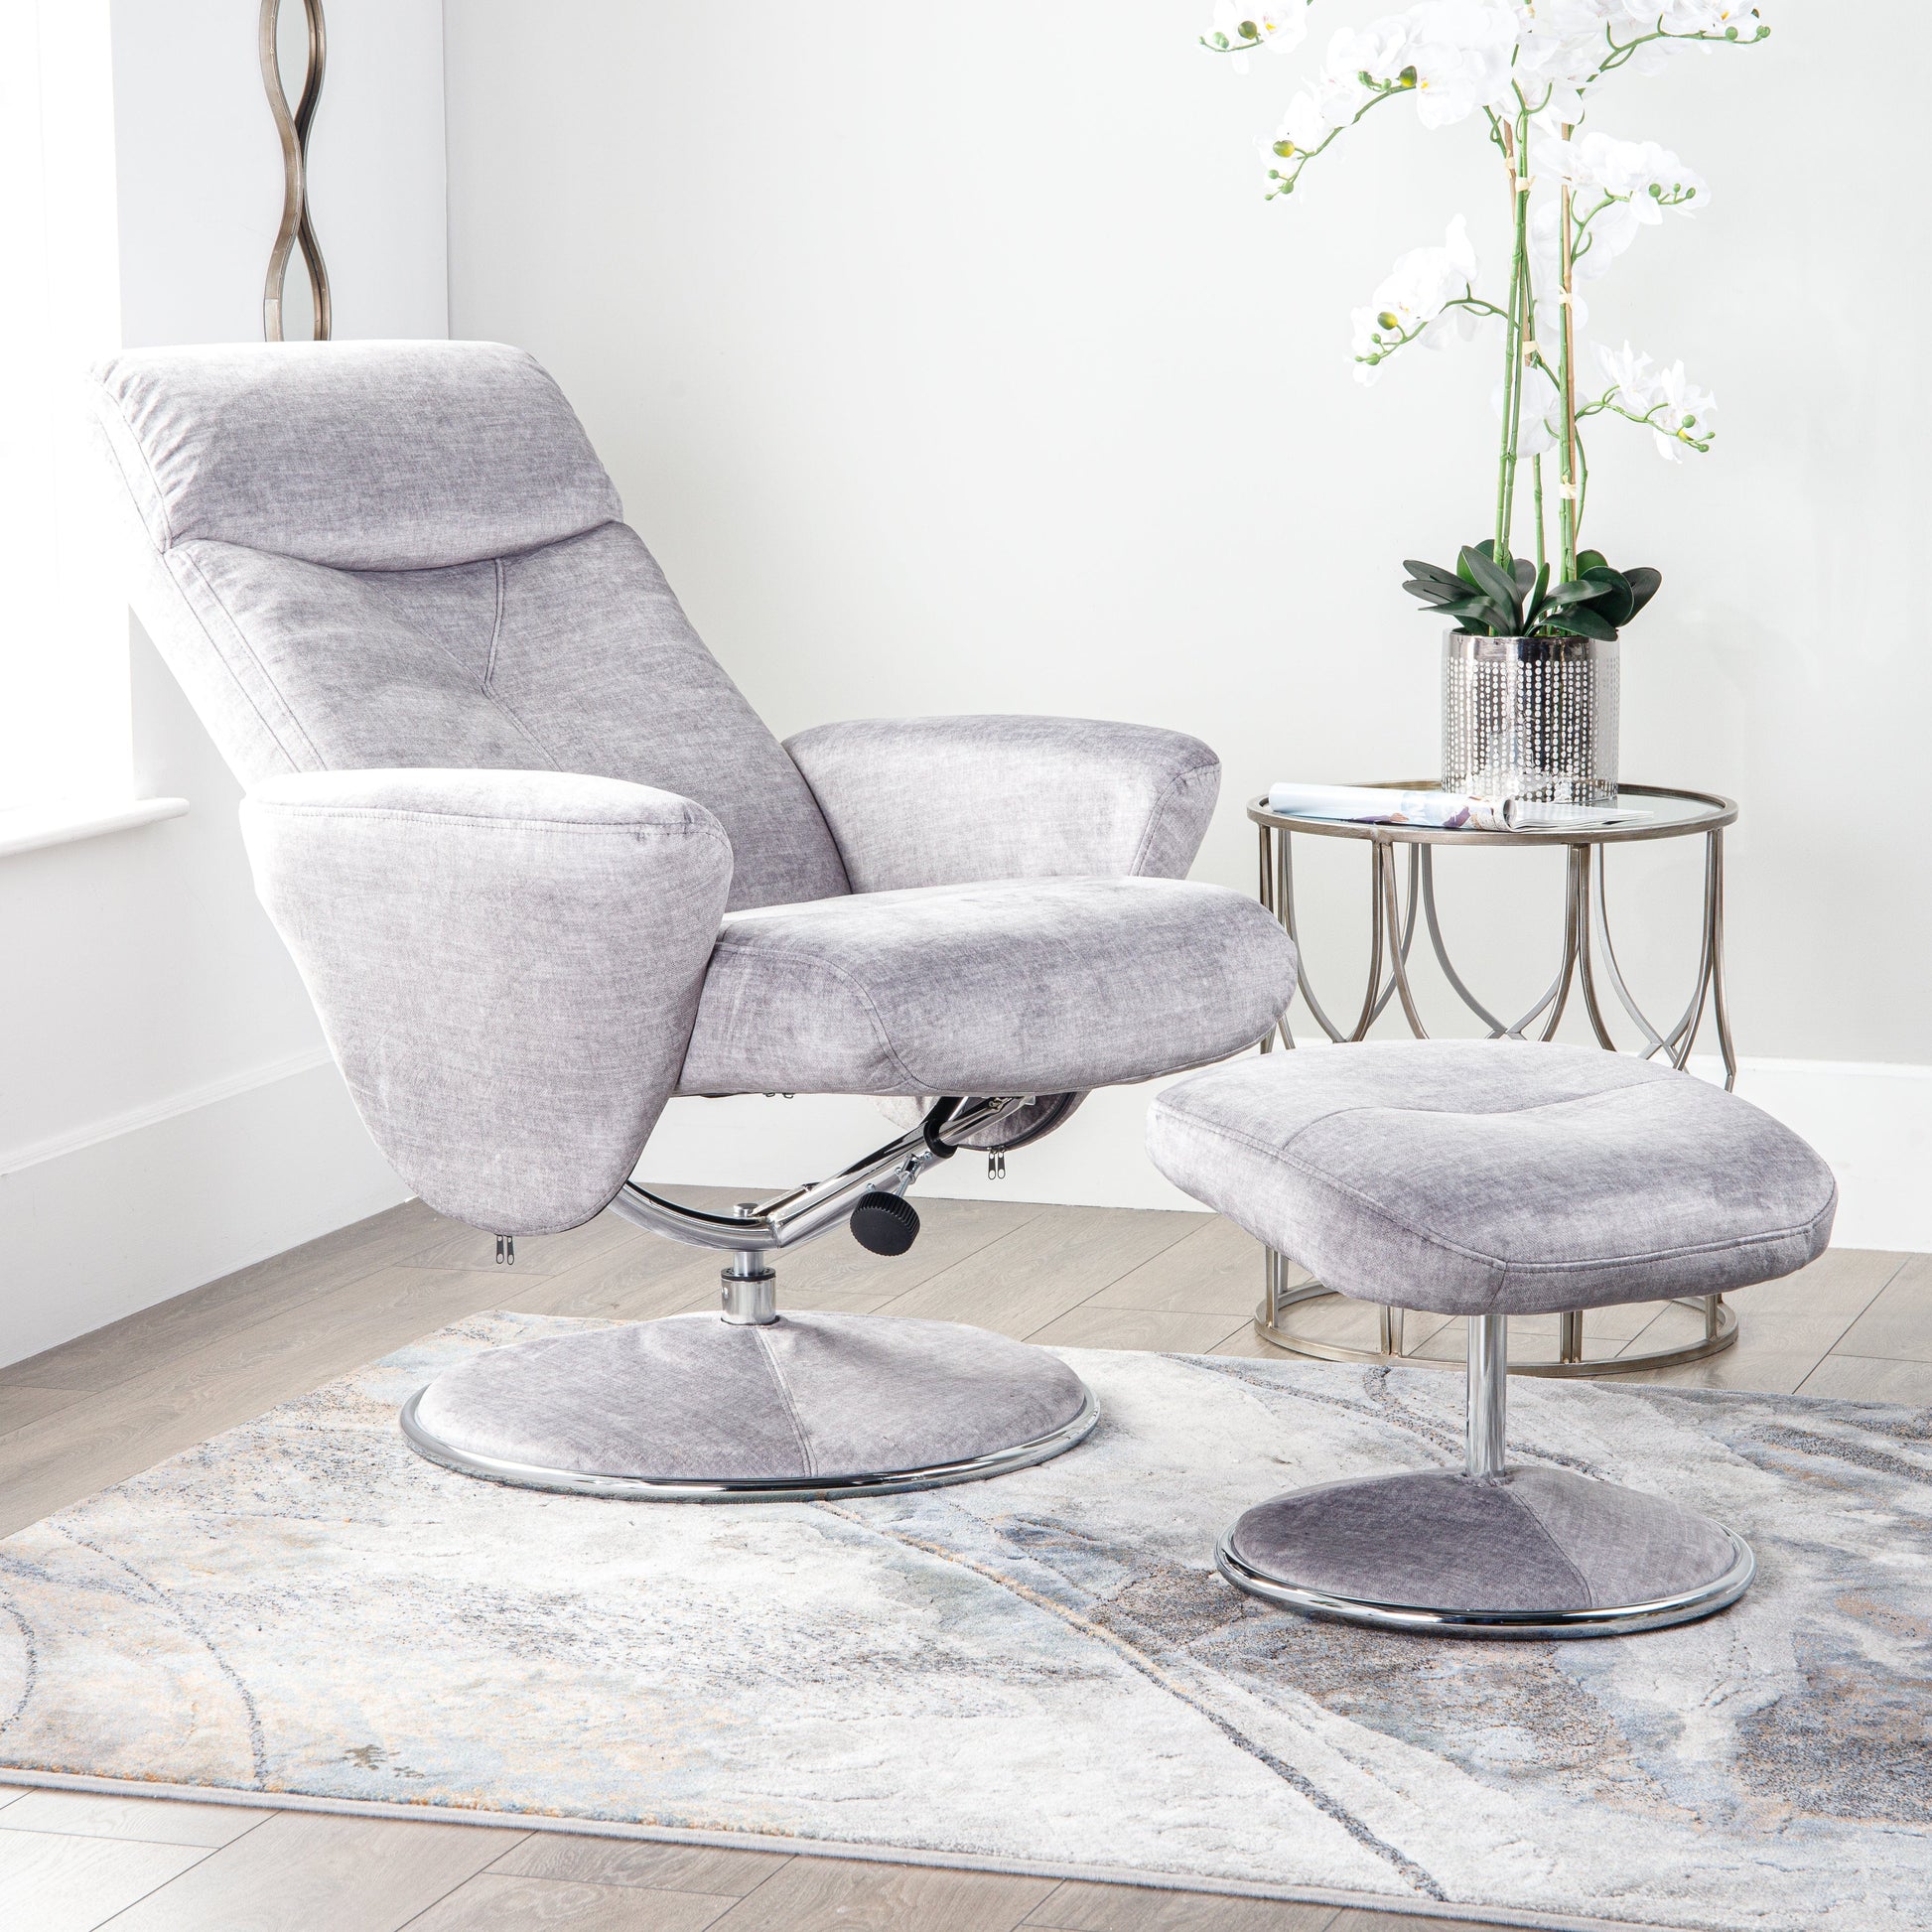 Furniture  -  Houston Silver Recliner Chair & Stool  -  60004239